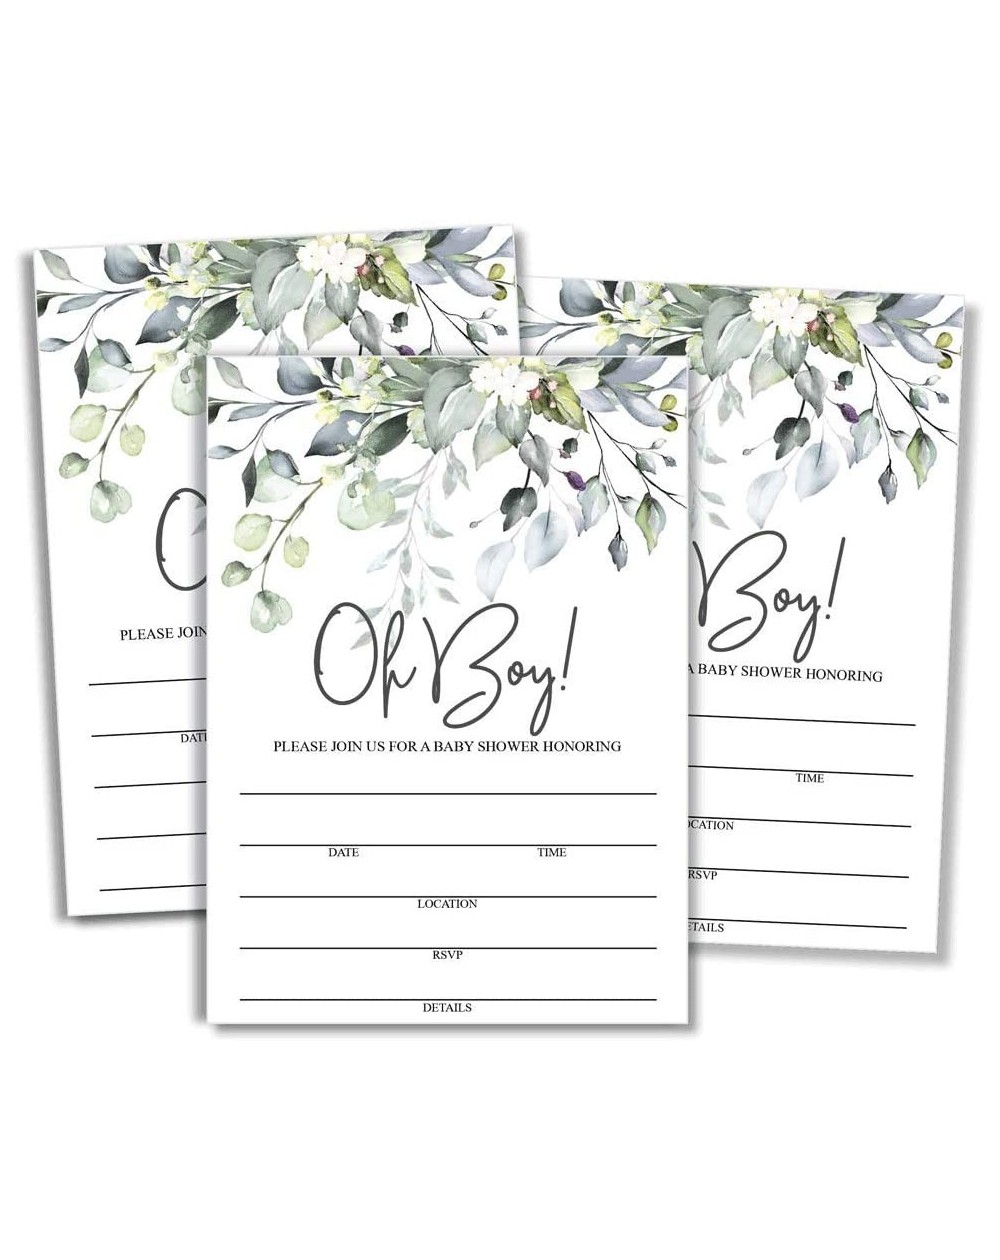 Invitations 50 Oh Boy Greenery Baby Shower Invitations and Envelopes (Large Size 5x7) - (50 Count) - C3196EY4EG3 $16.87